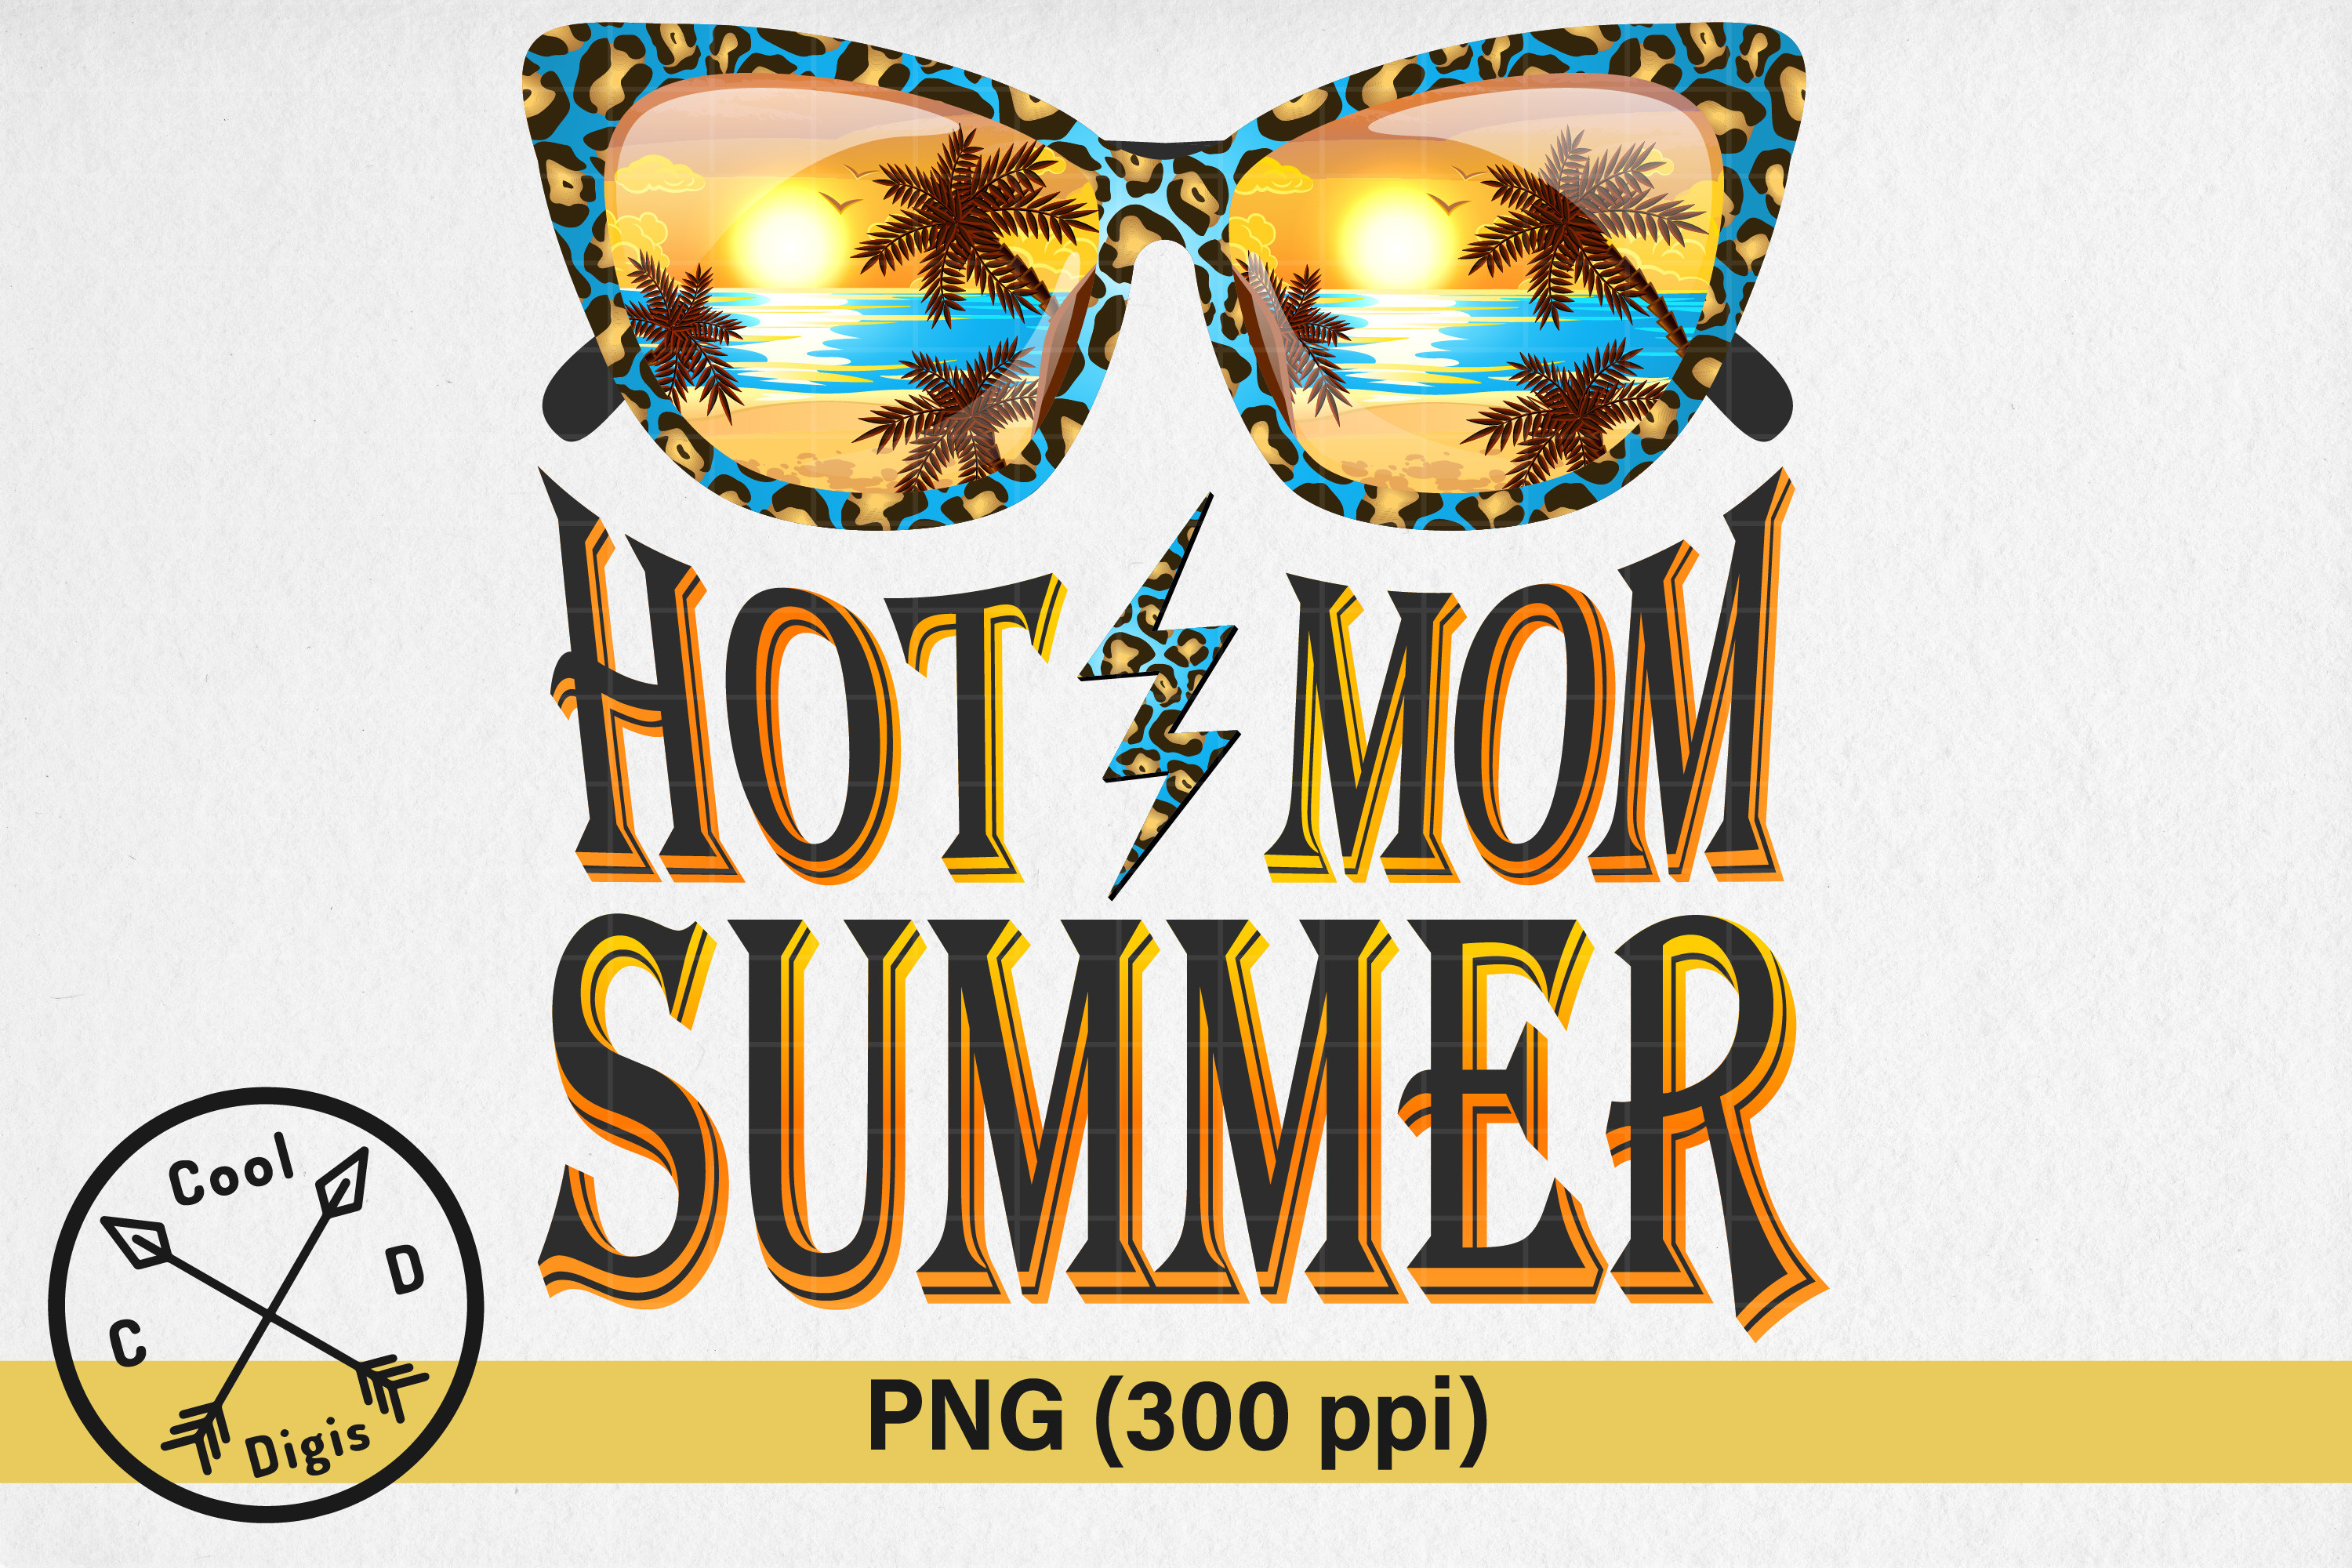 Hot Mom Summer Sublimation Shirt Design Graphic by Cool Digis ...